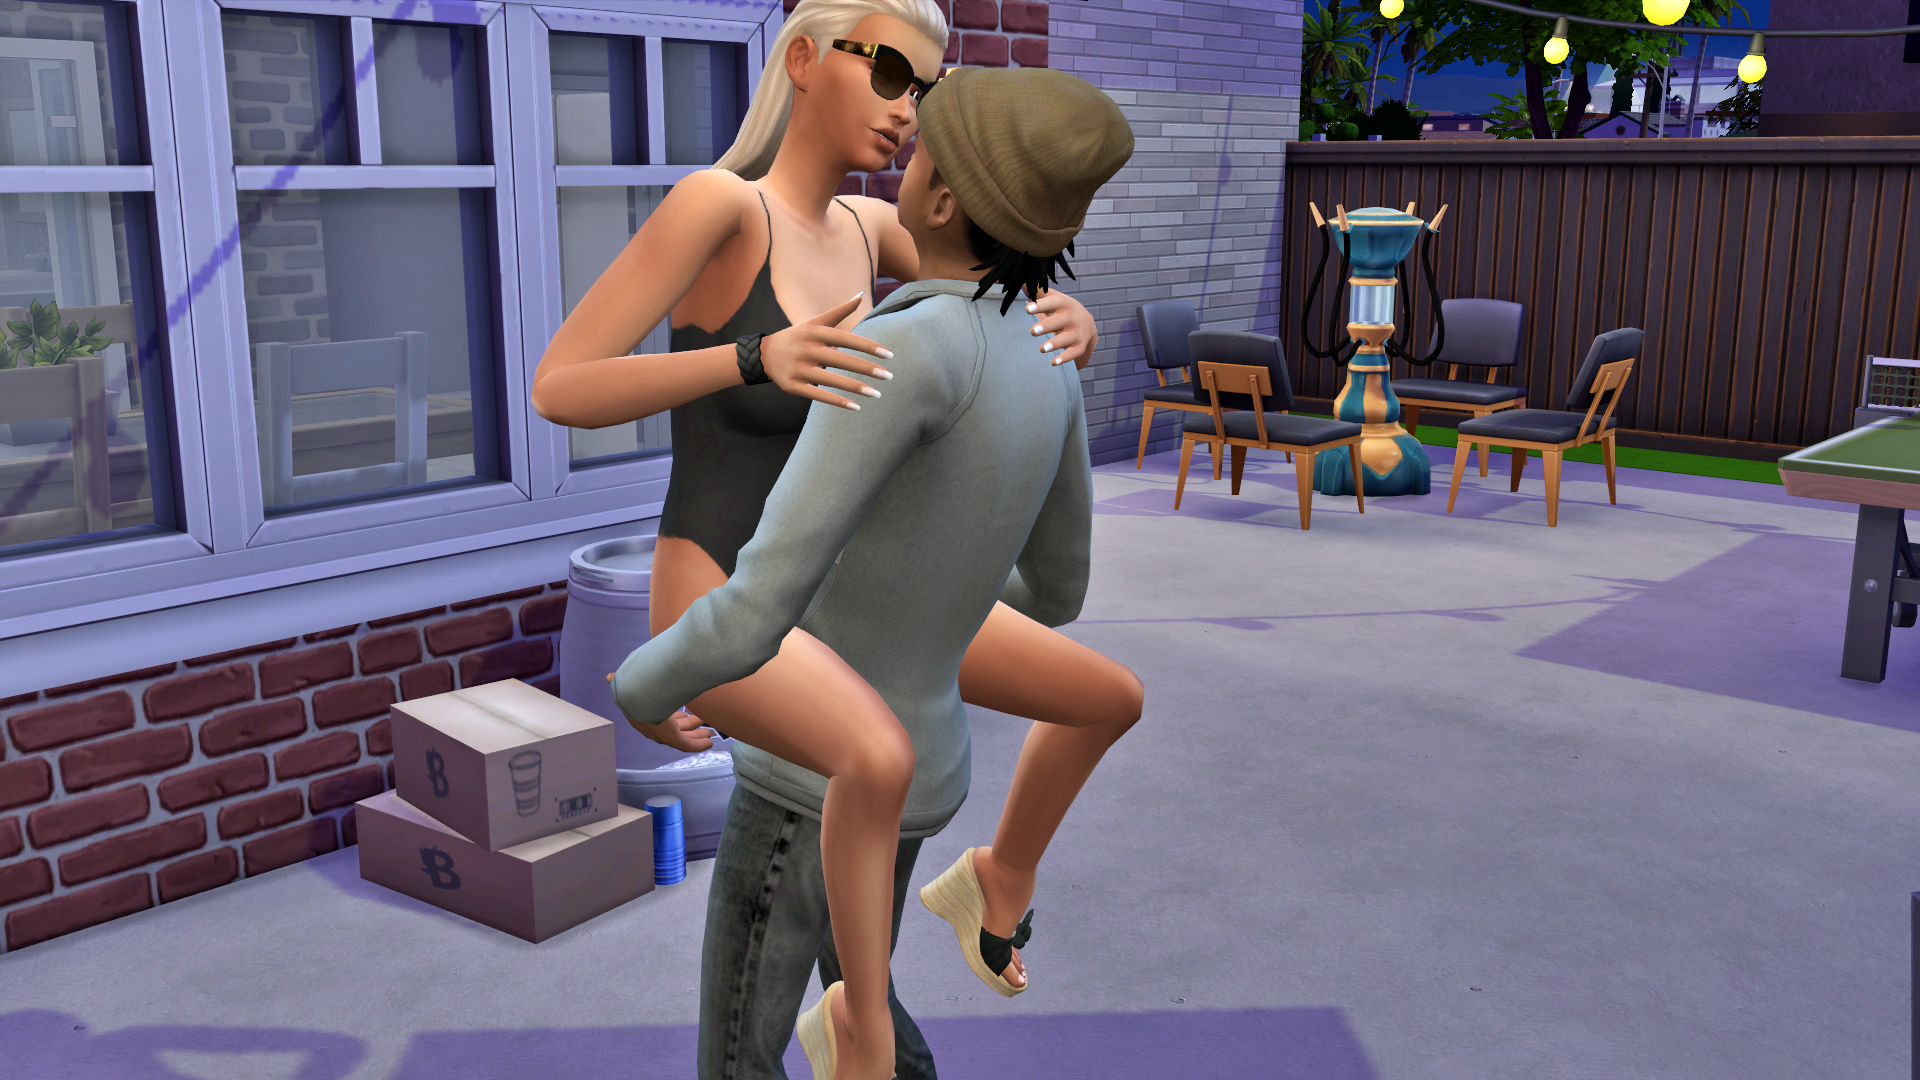 Can you do a threesome in the sims 4